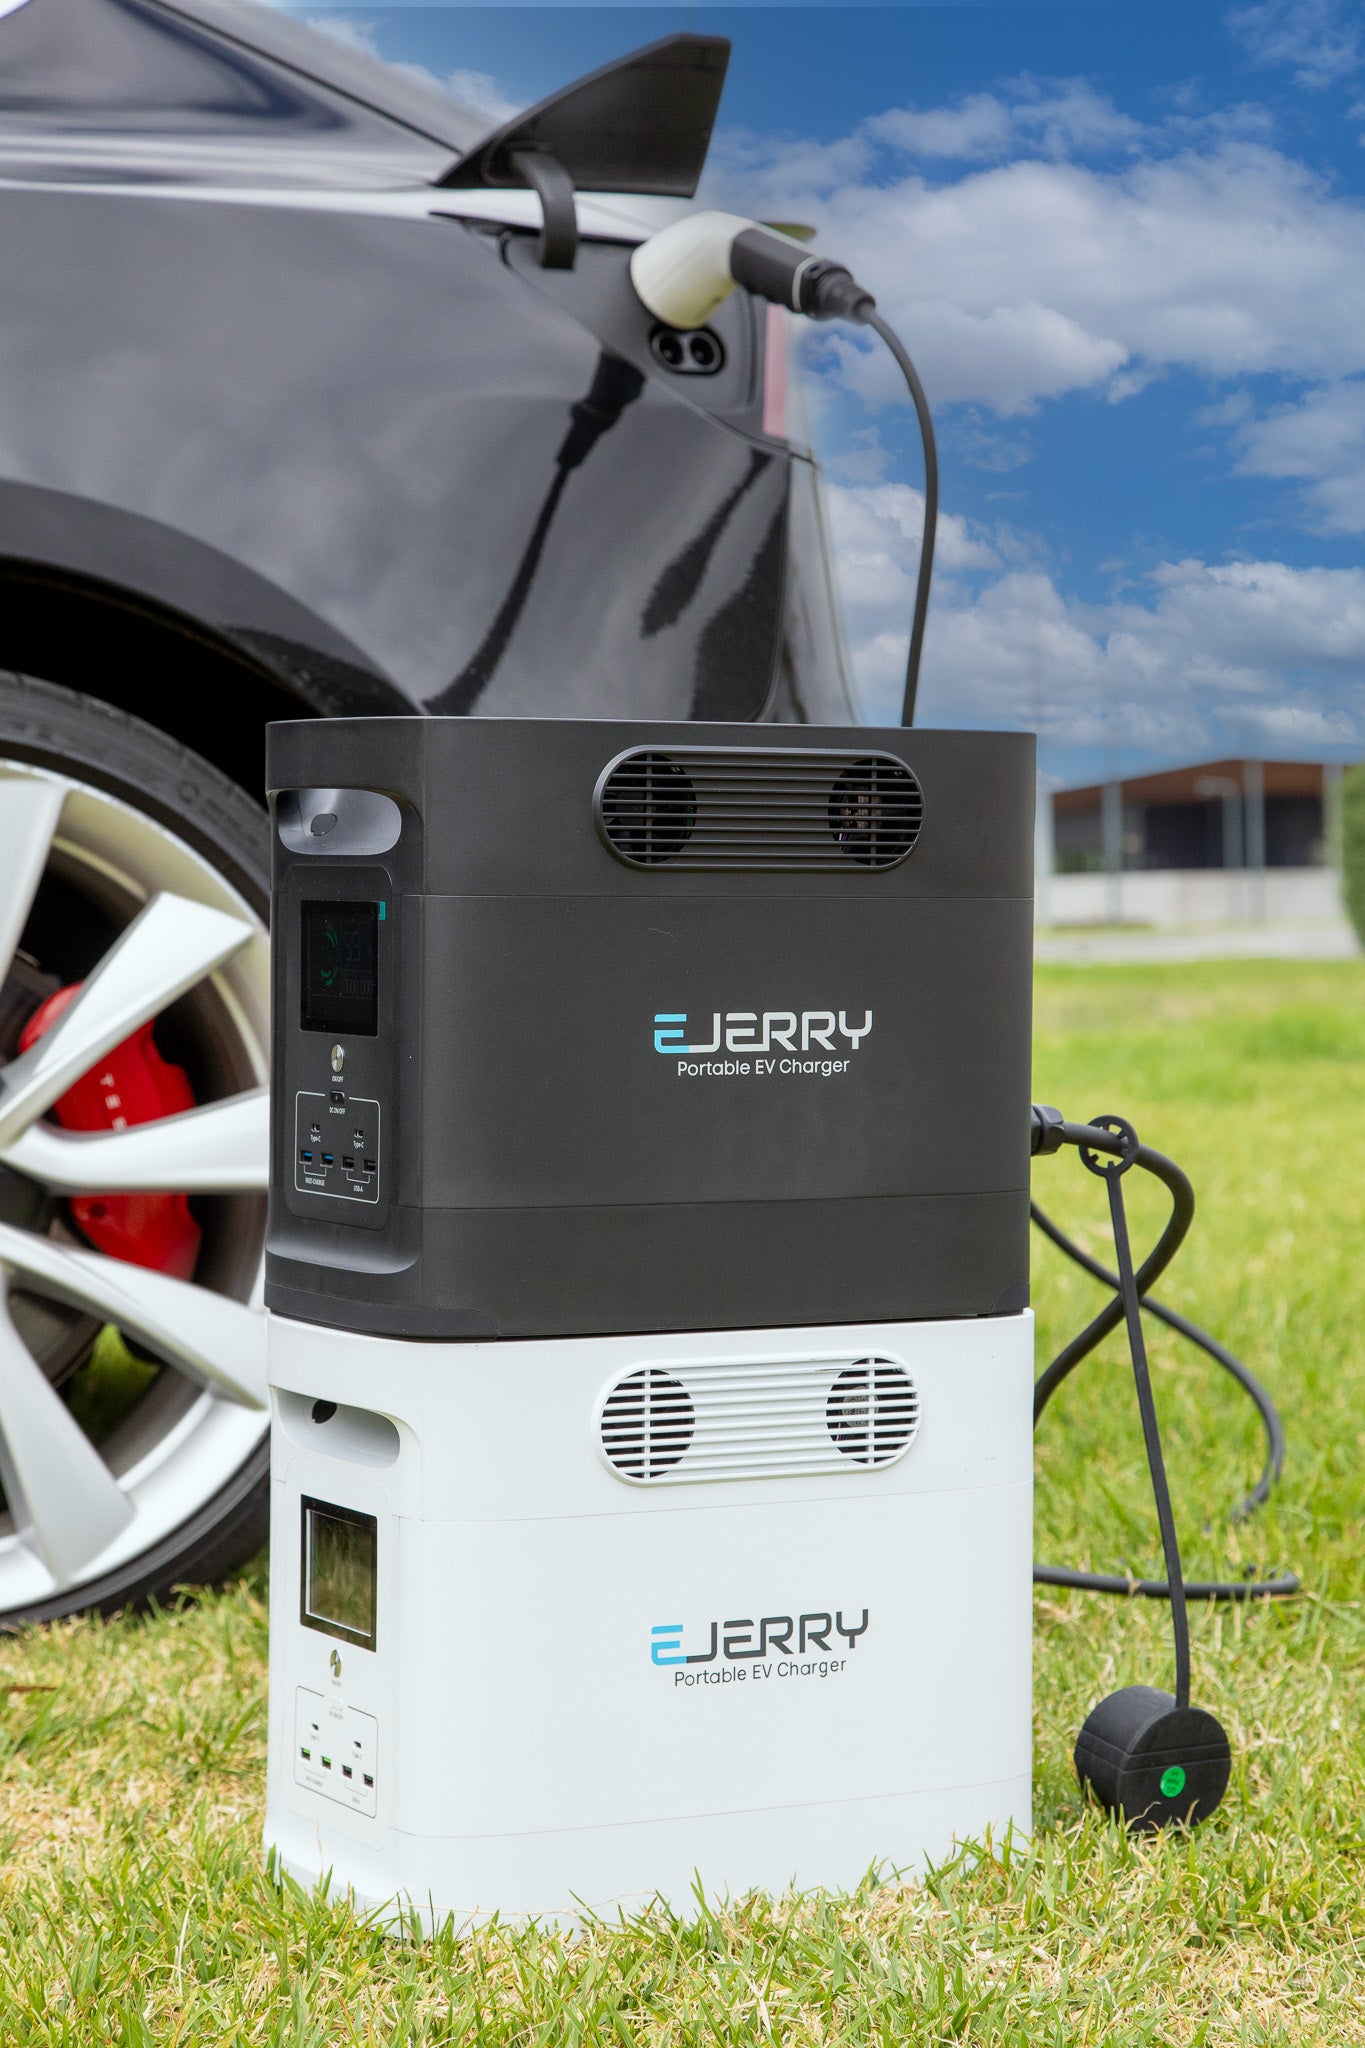 EJERRY - Portable EV Charger with Type 2 EV Charging Gun